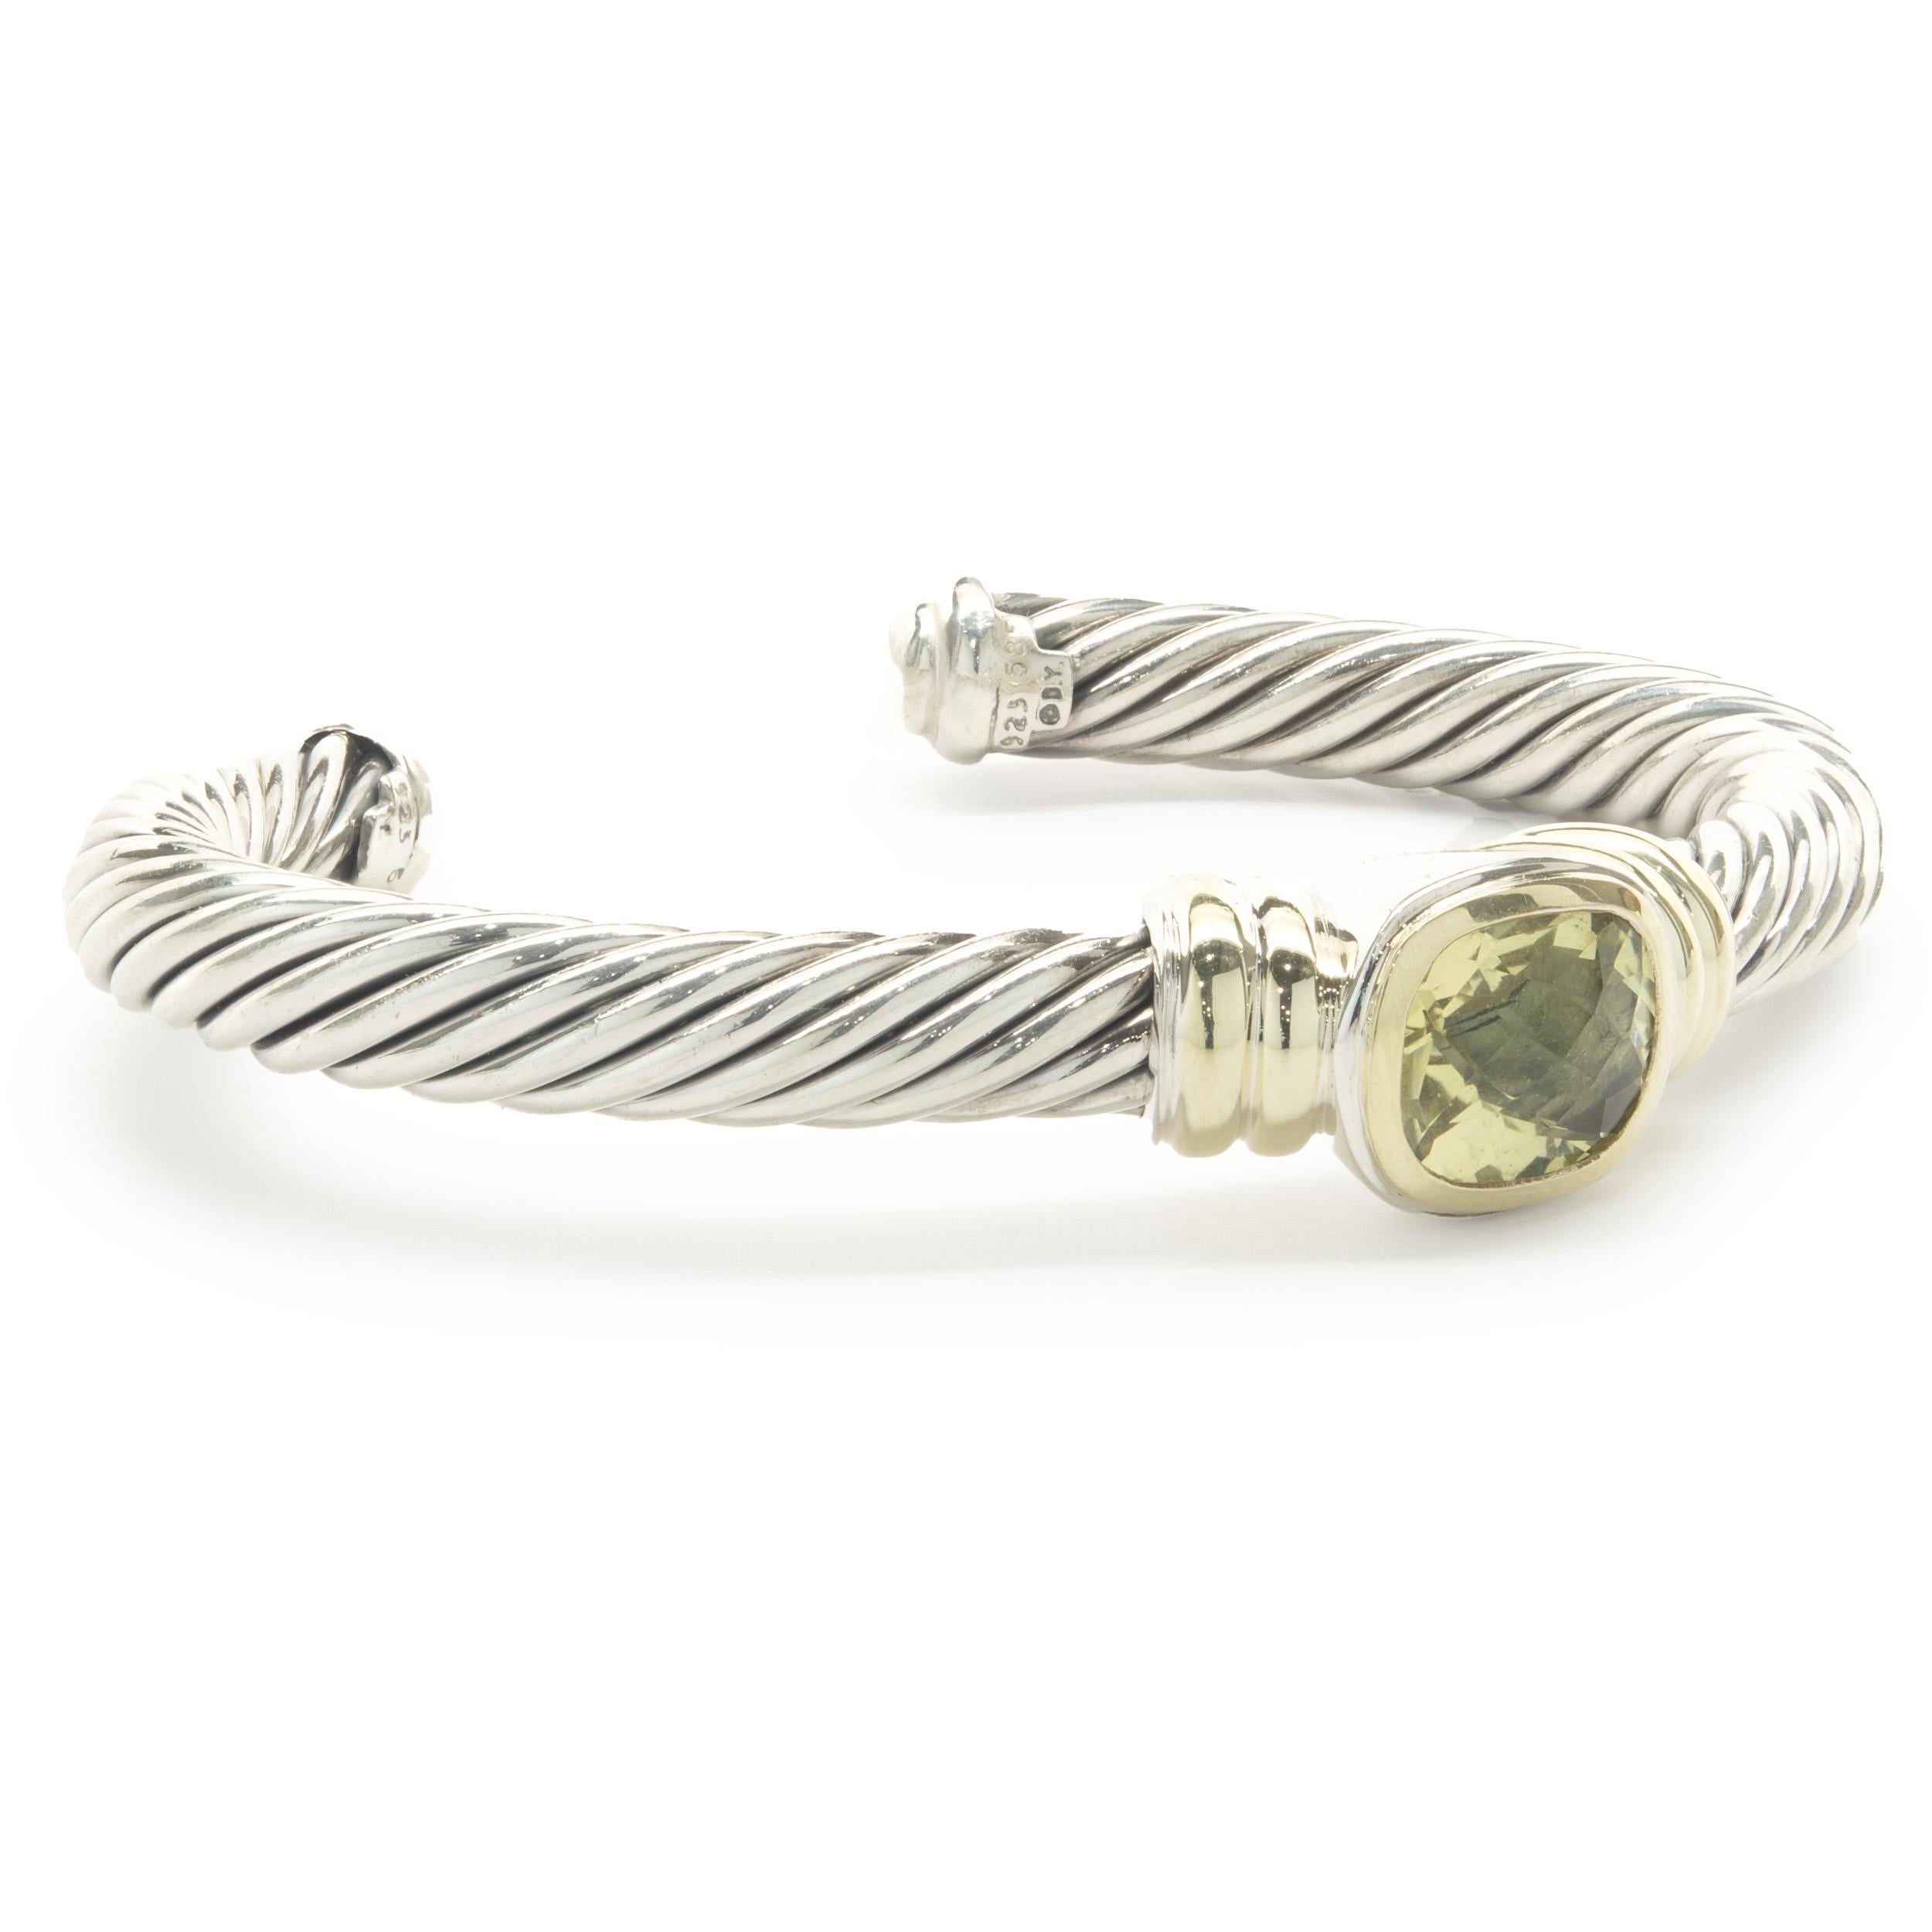 Designer: David Yurman
Material: Sterling Silver & 14K yellow gold
Dimensions: bracelet will fit a 7-inch wrist
Weight: 50.18 grams